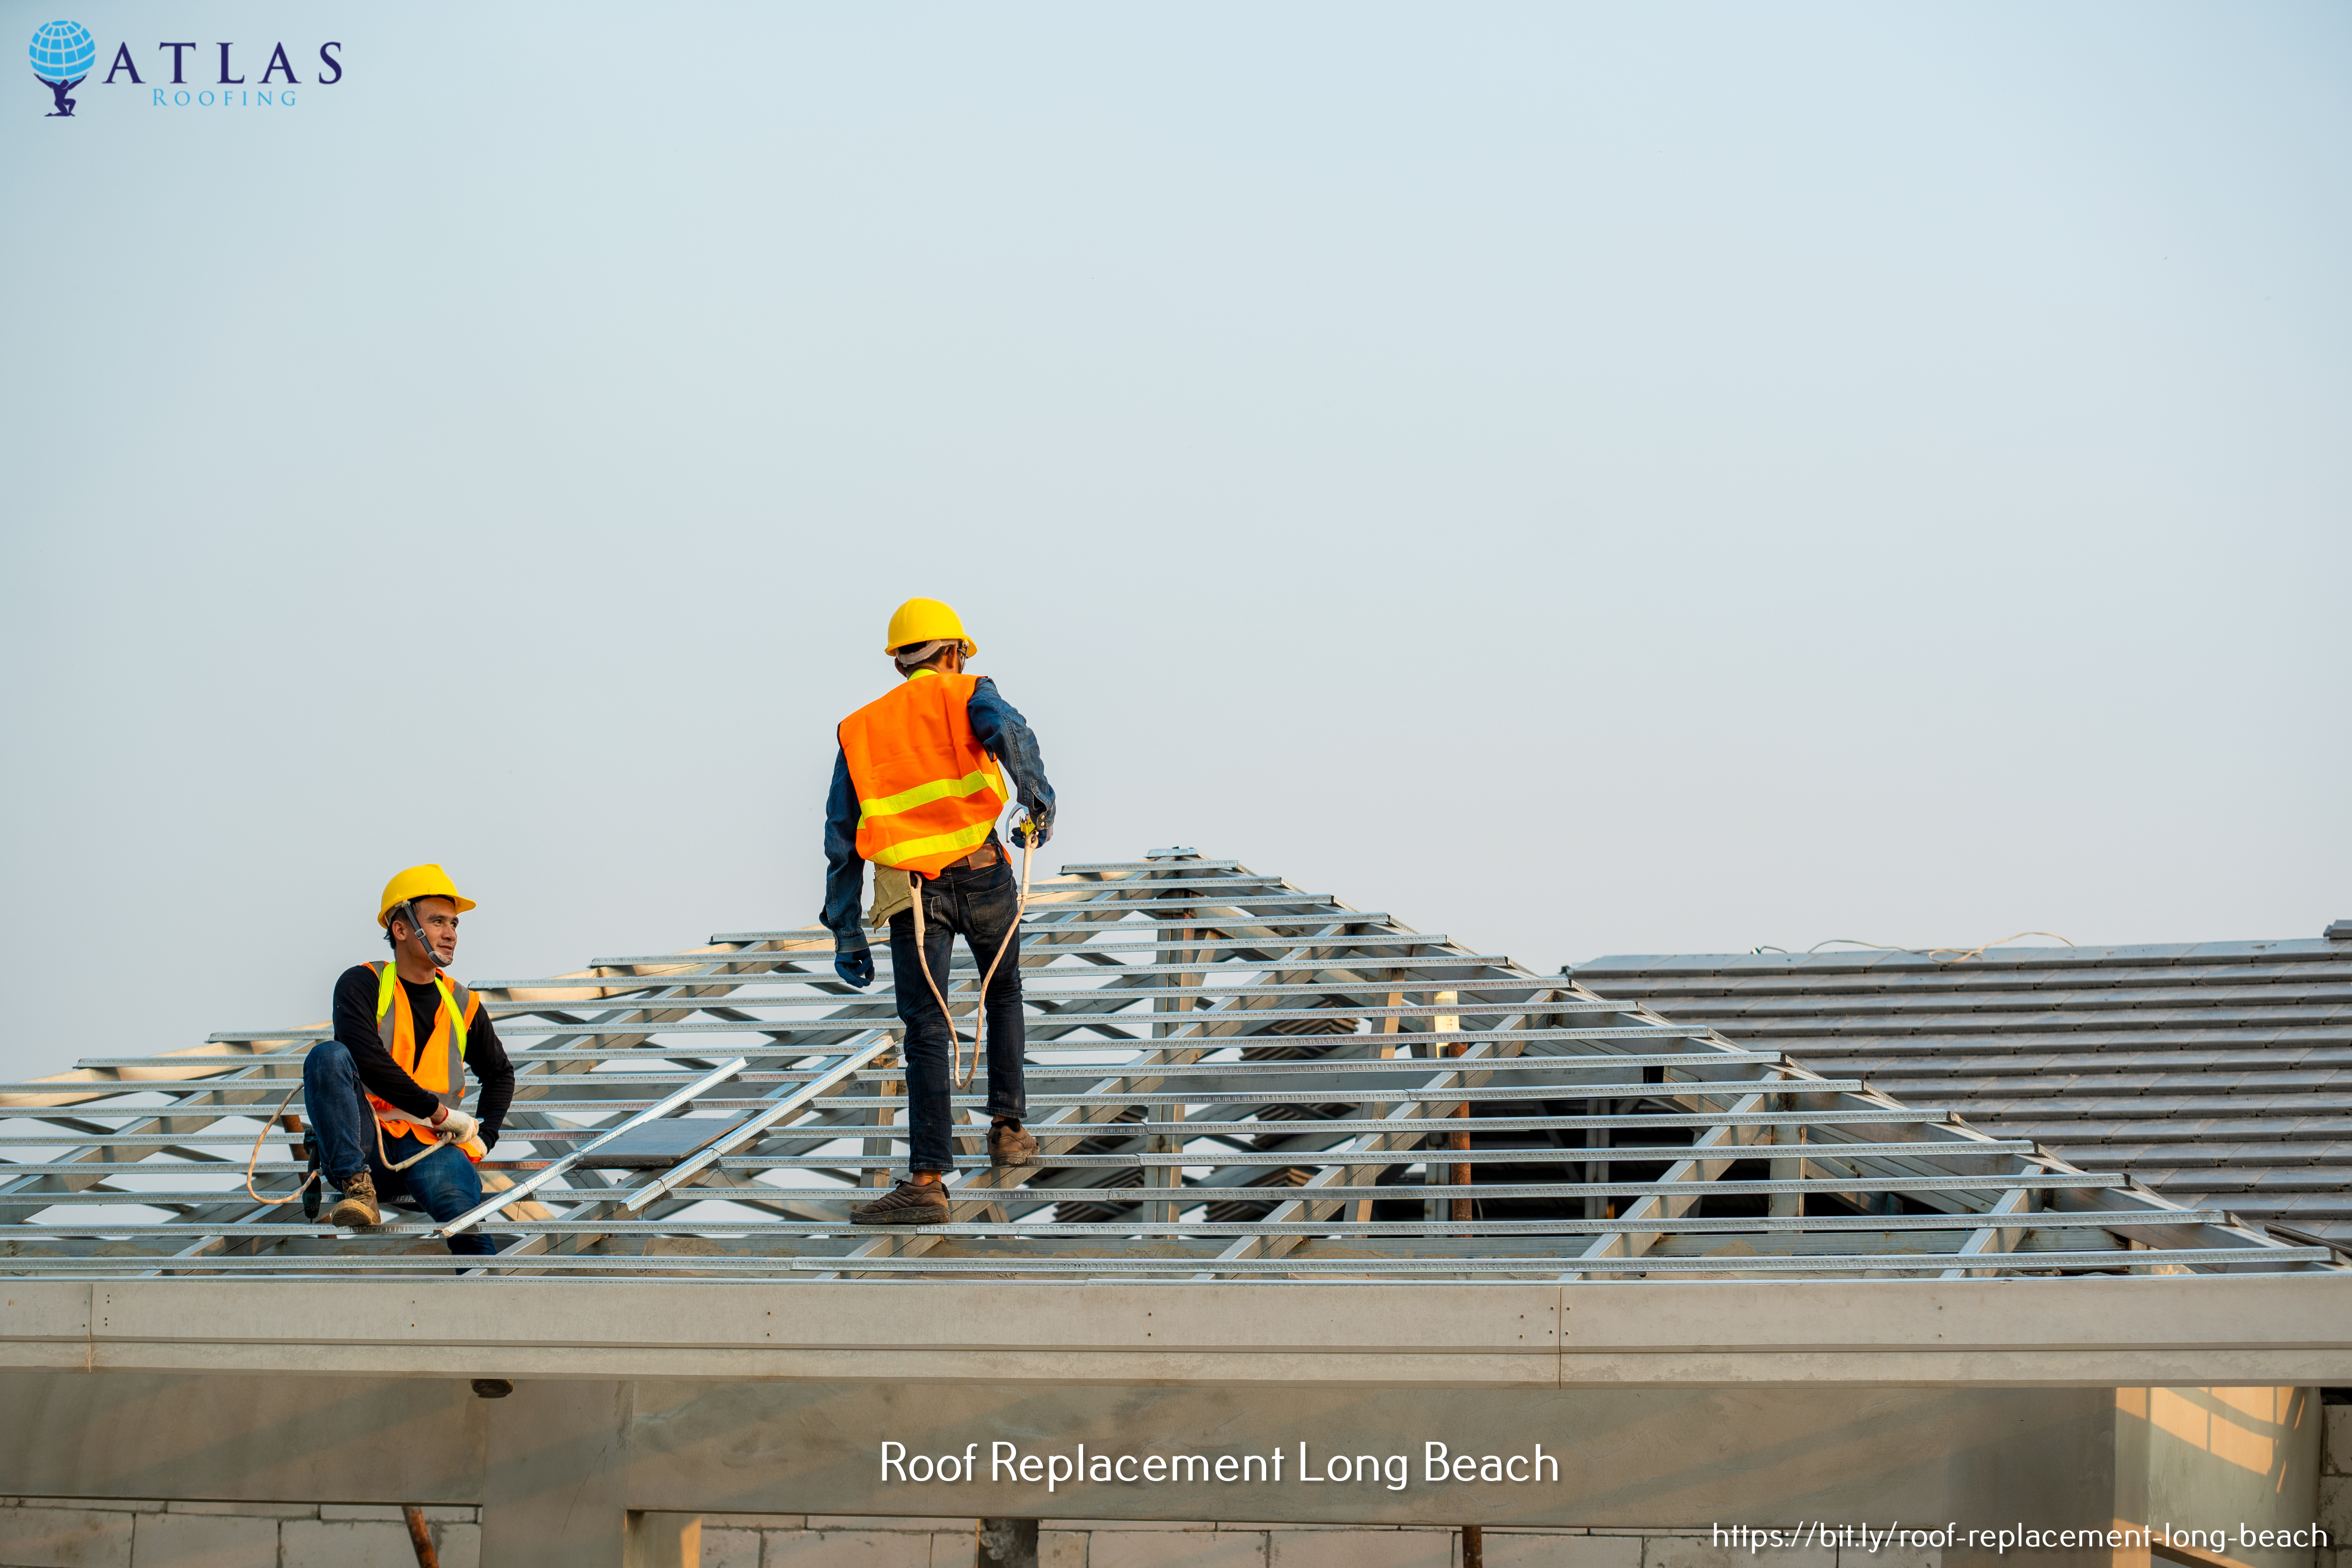 Atlas Roofing of Long Beach: The Best Reliable Roofing Company in Long Beach, CA